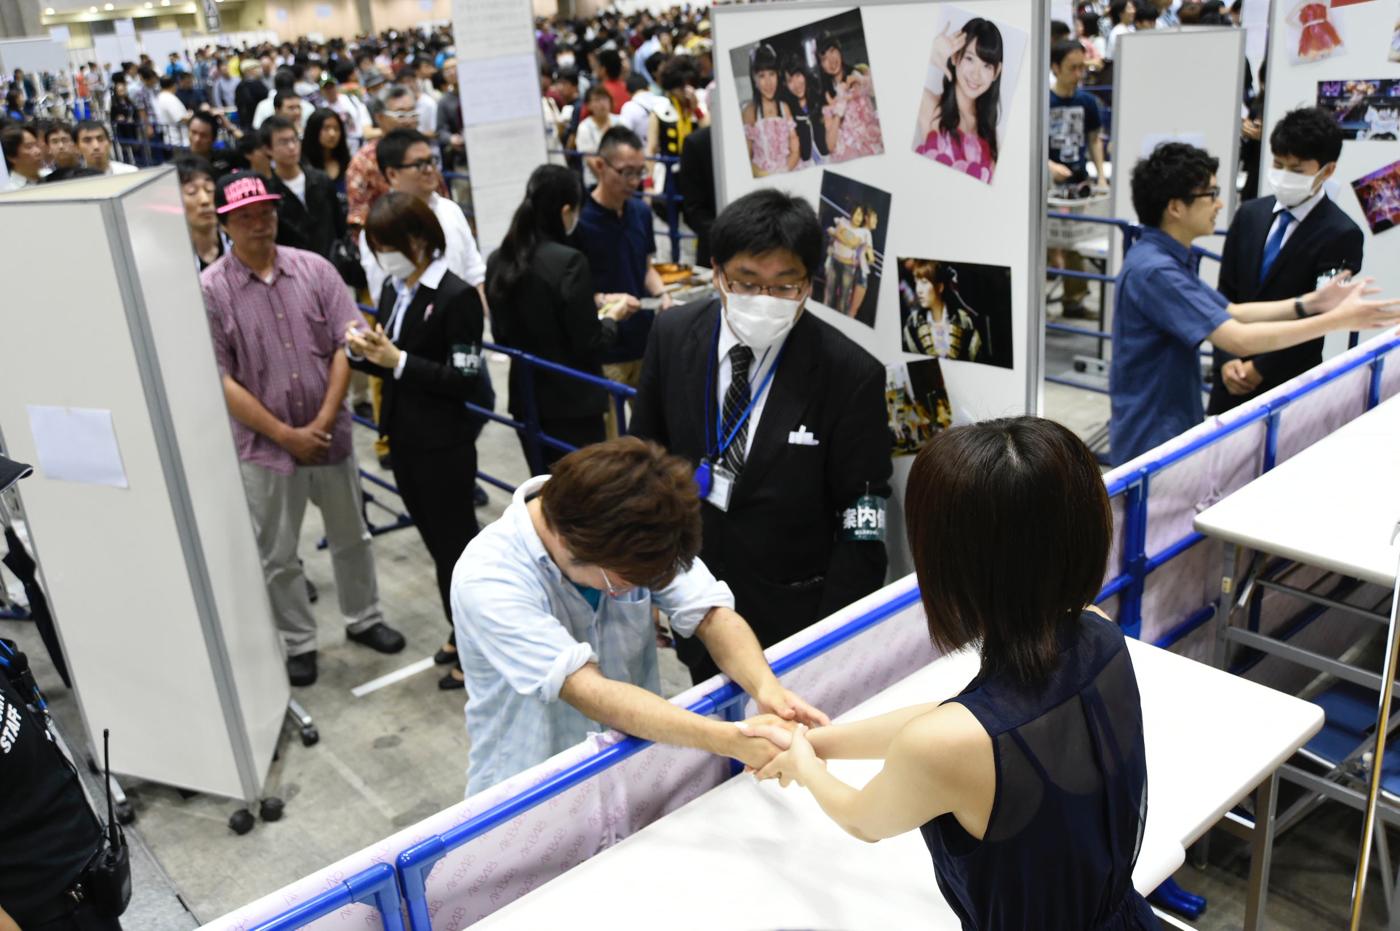 A devoted fan meeting a popular Japanese idol at a handshake event